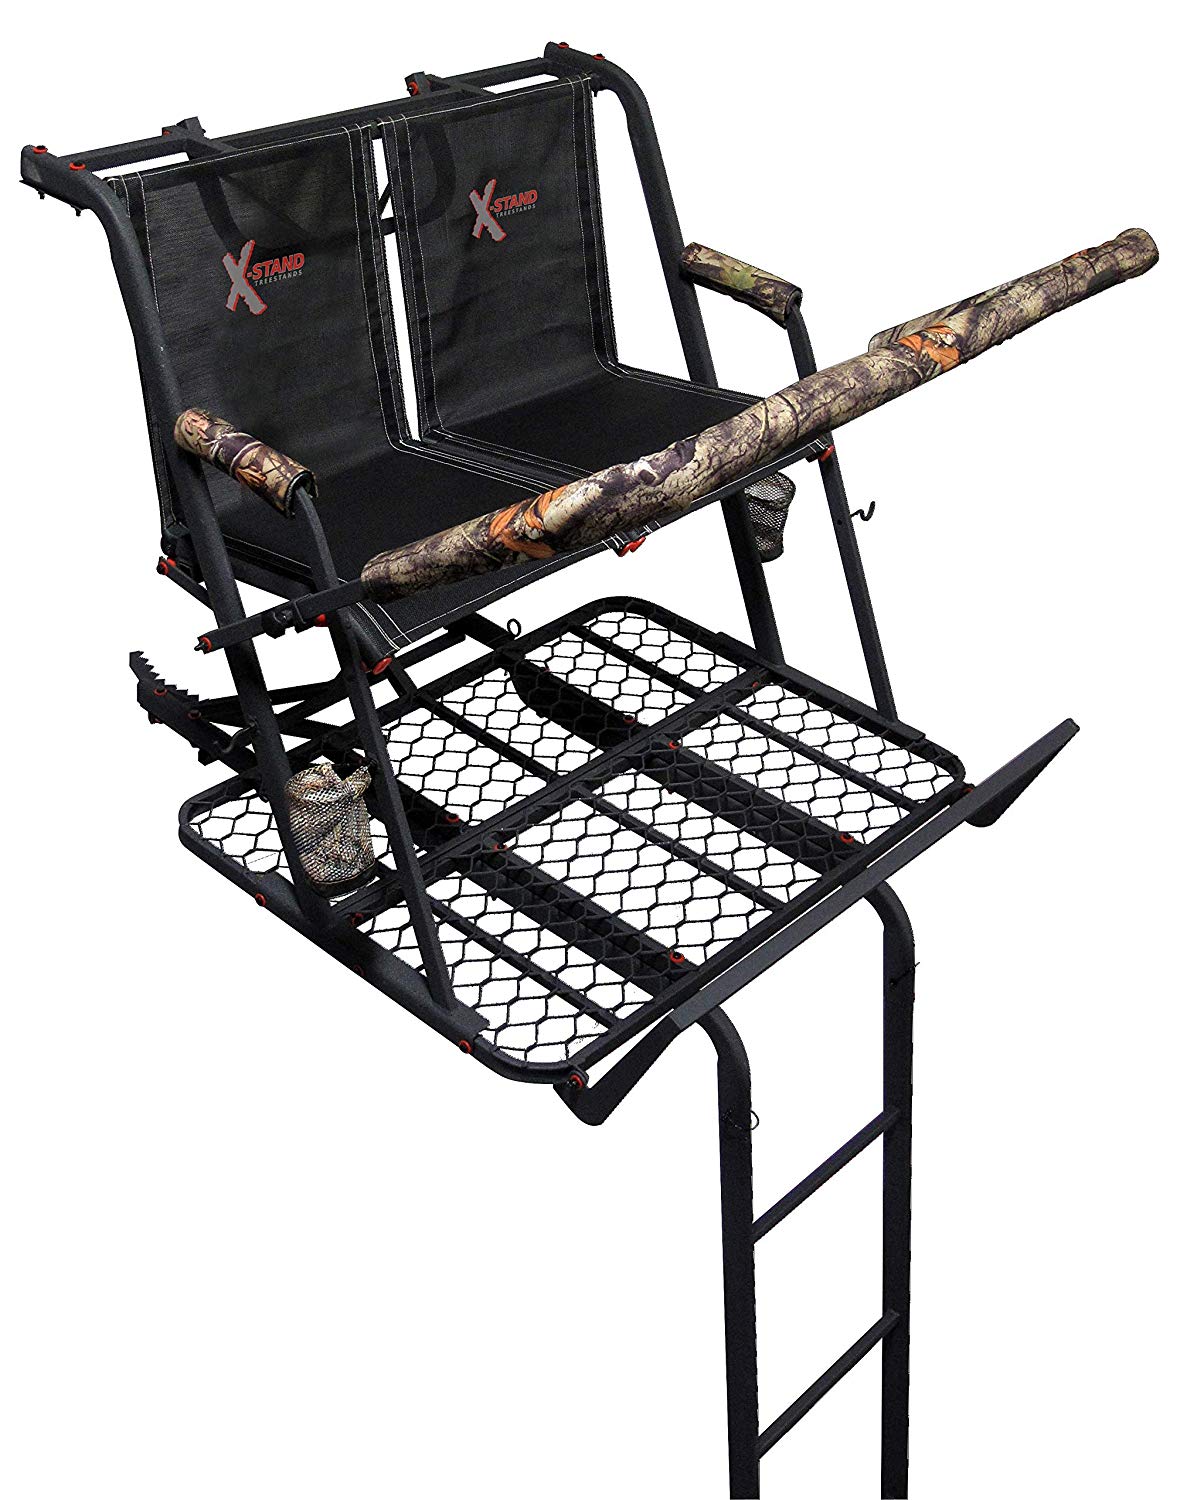 HME Waterproof Universal 2-Man Treestand/Ladder Stand Seat Cover TMSC  FAST S&H! 